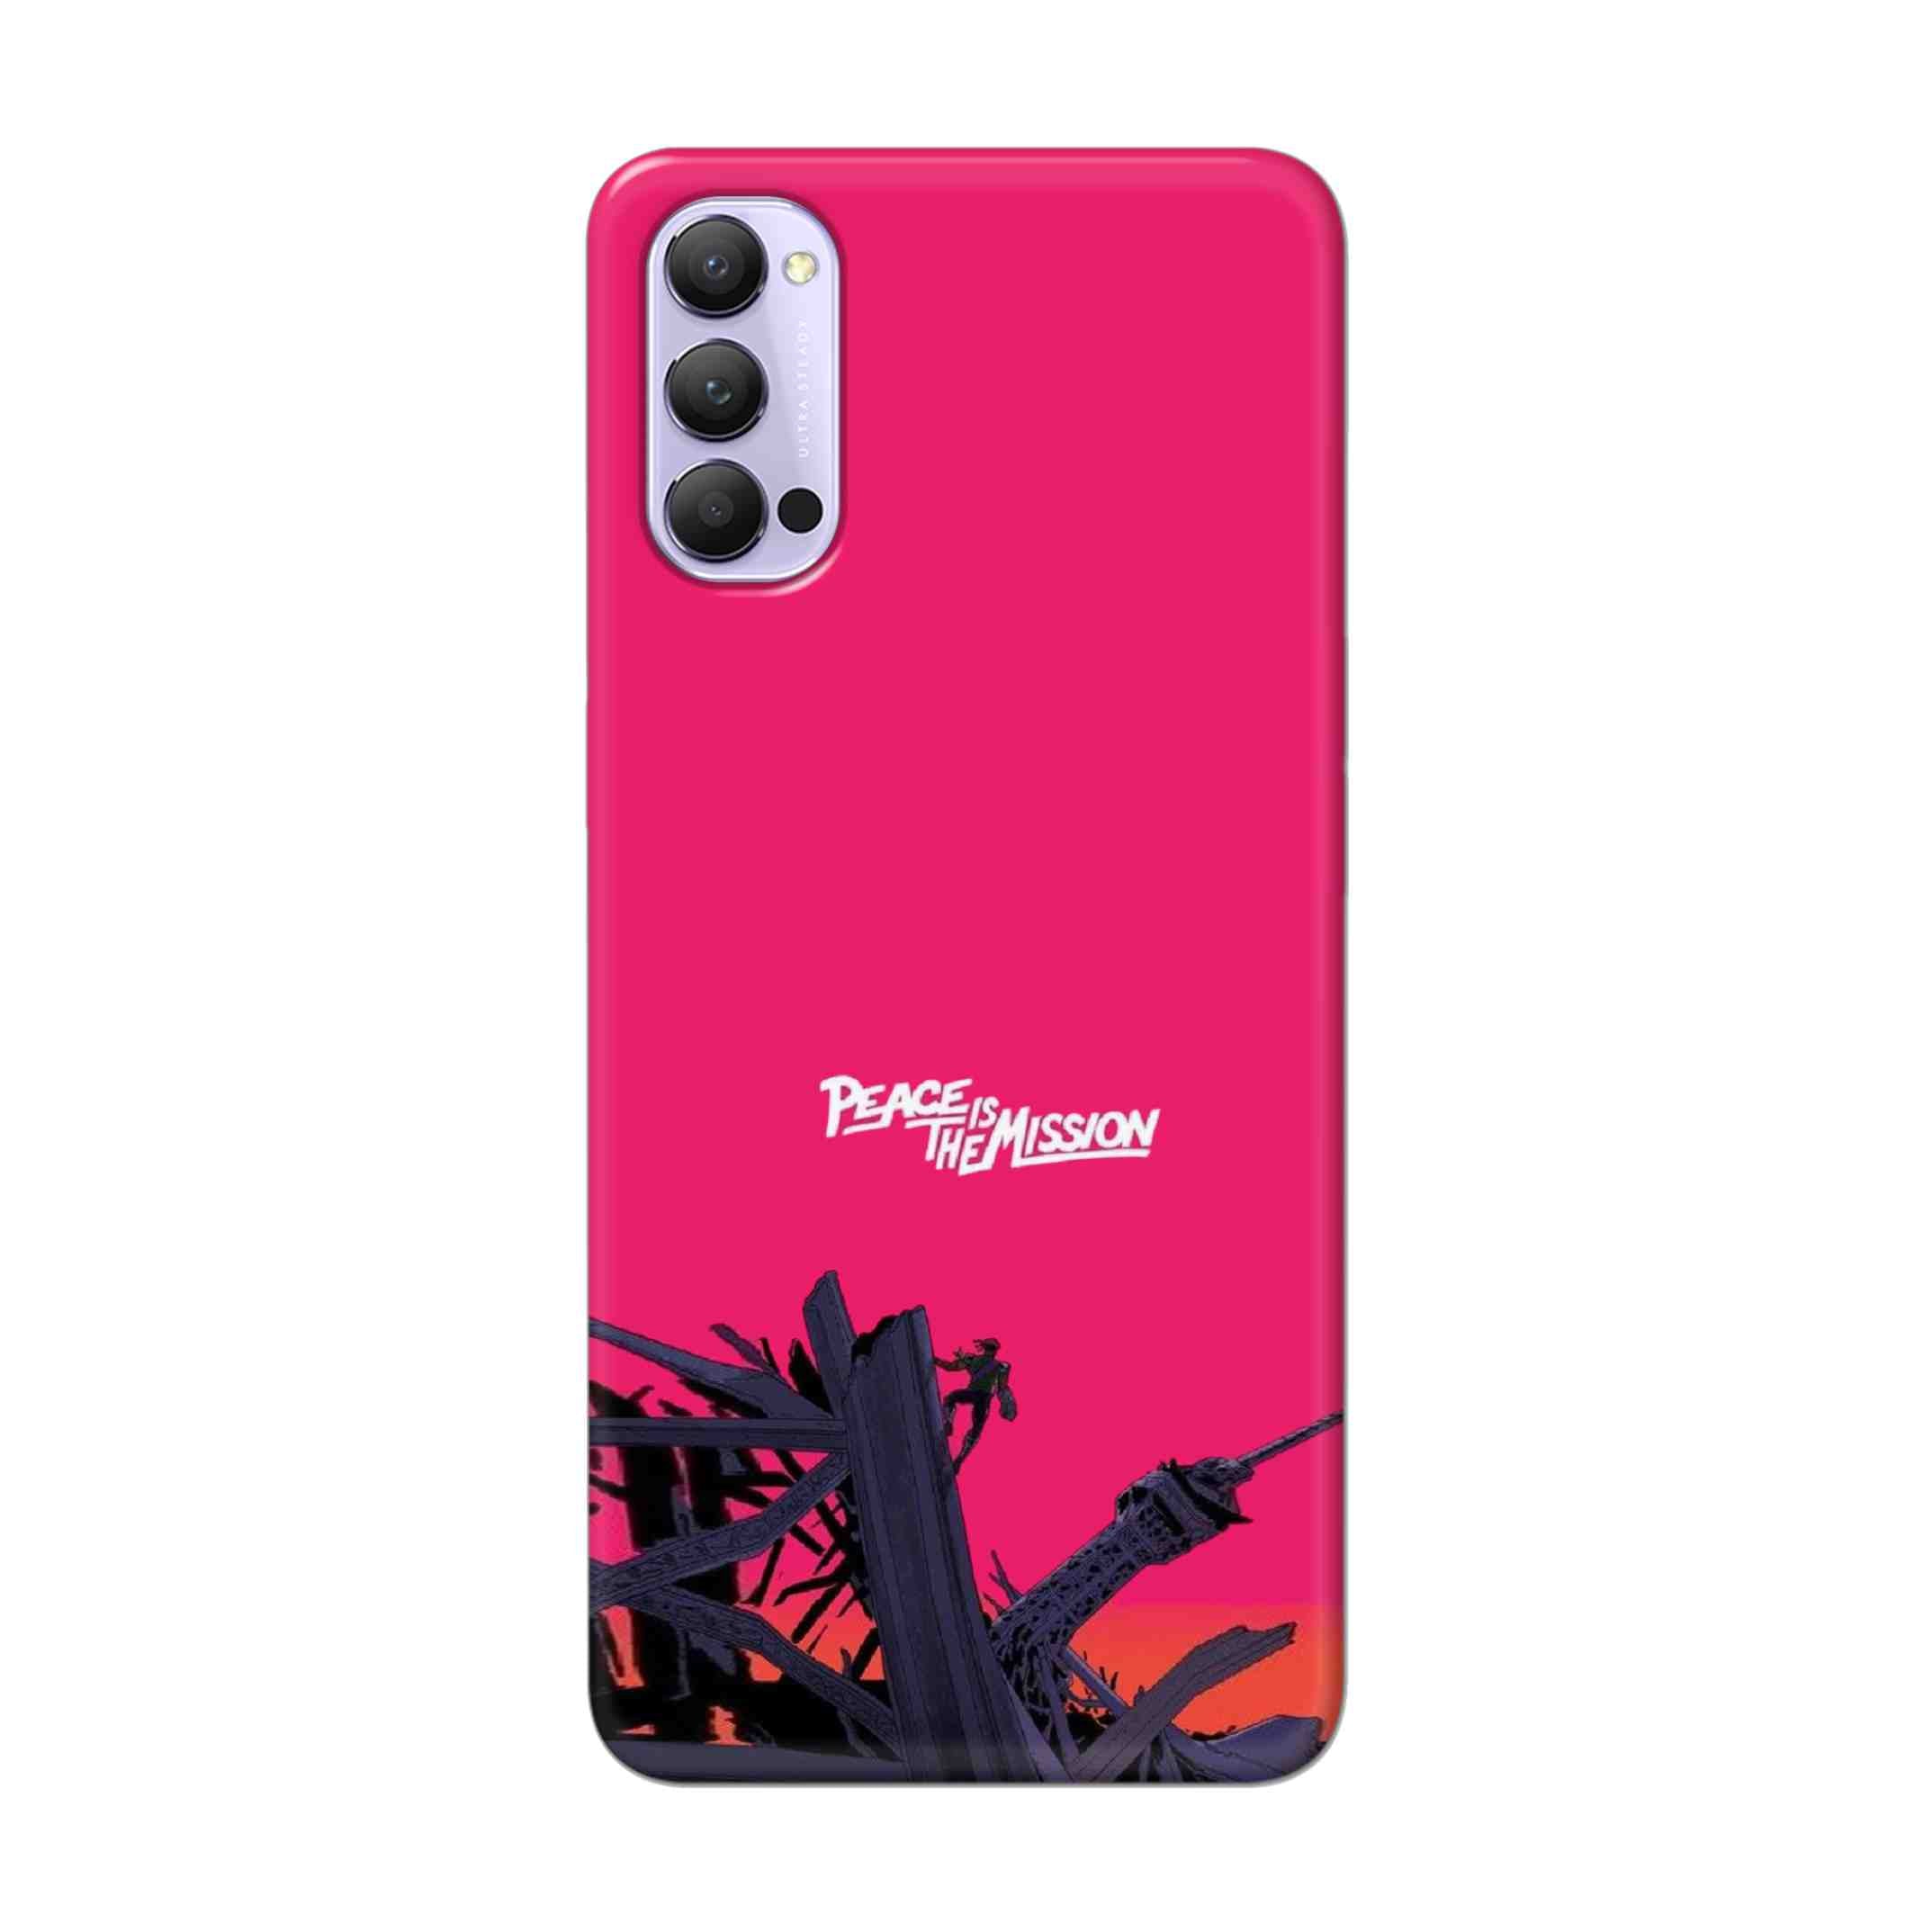 Buy Peace Is The Mission Hard Back Mobile Phone Case Cover For Oppo Reno 4 Pro Online